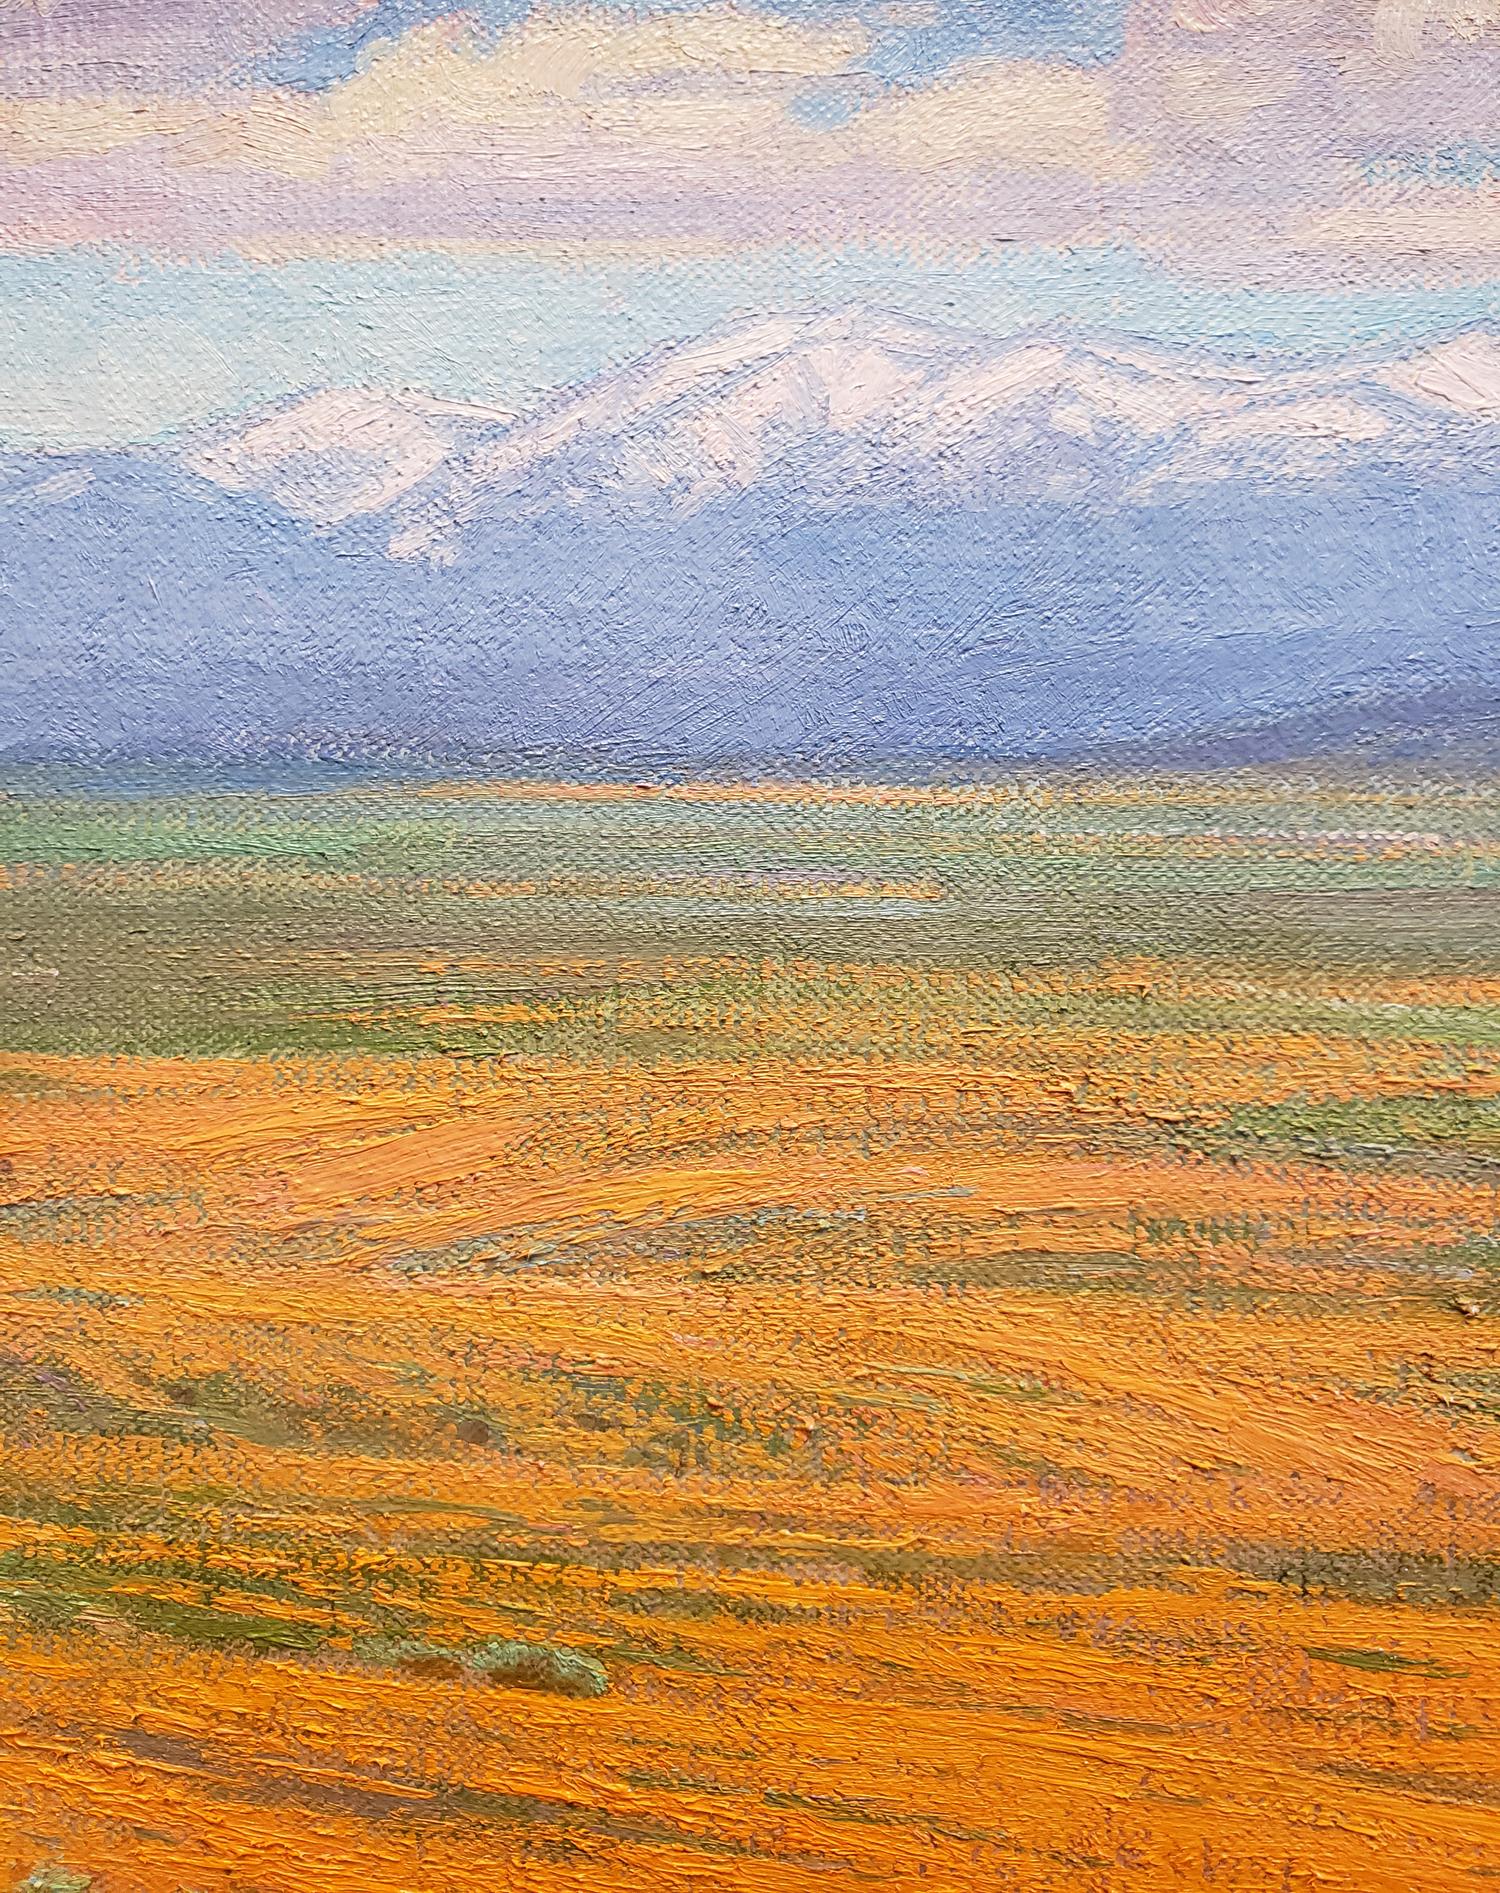 California Superbloom - Impressionist Painting by Charles Muench